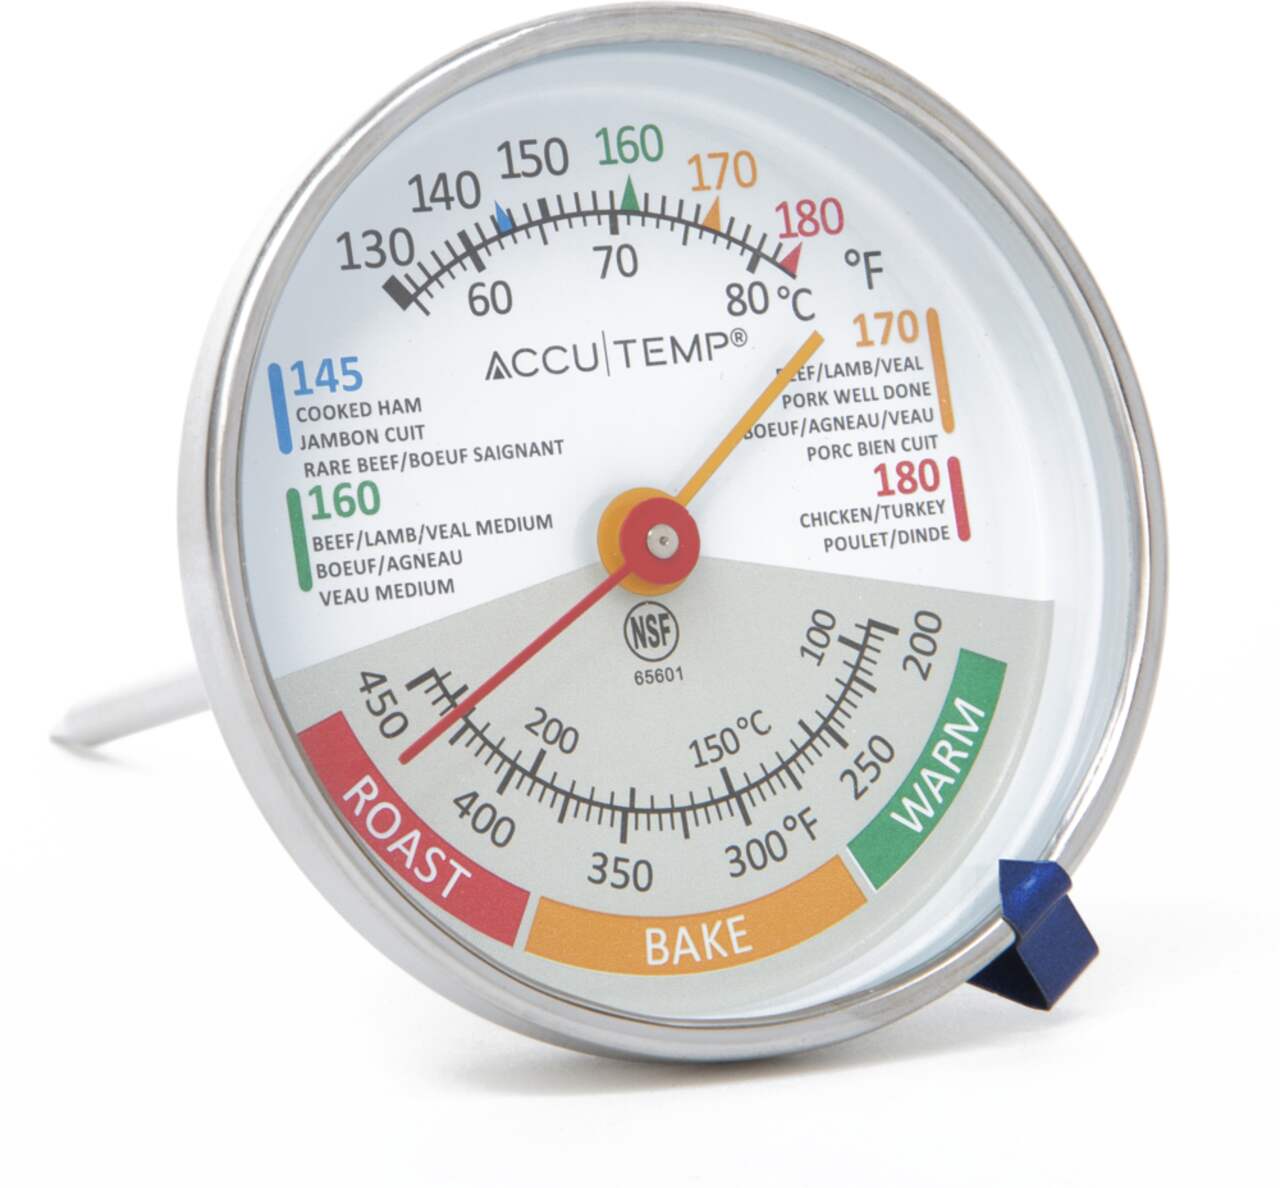 Accutemp Meat & Oven Thermometer